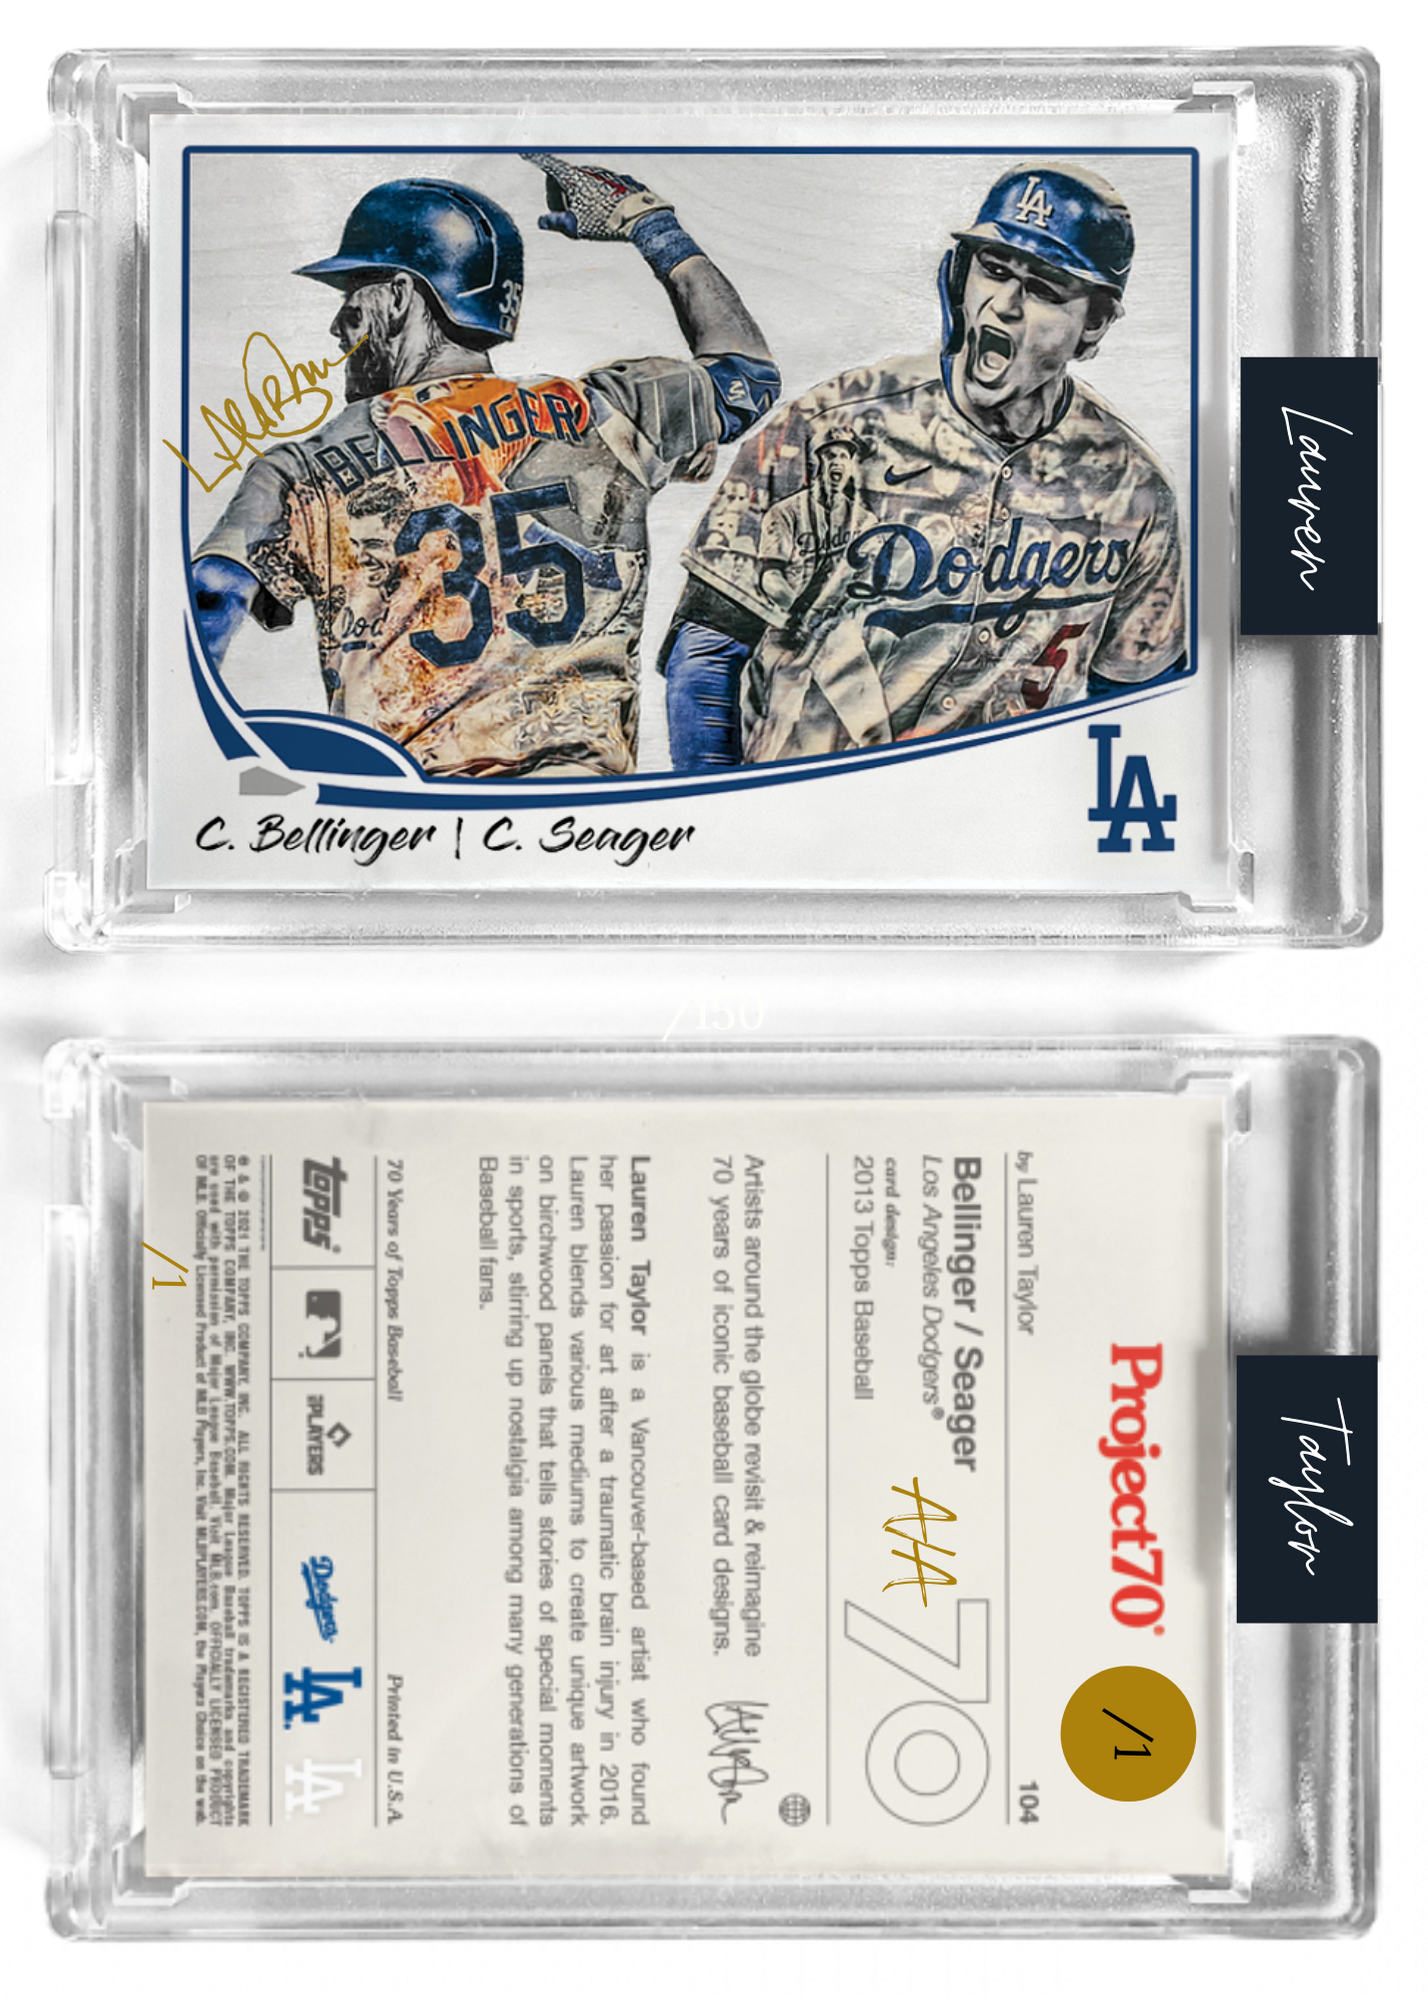 /1 Gold Metallic Artist Signature - Topps Project 70 130pt card #104 by Lauren Taylor - Cody Bellinger / Corey Seager